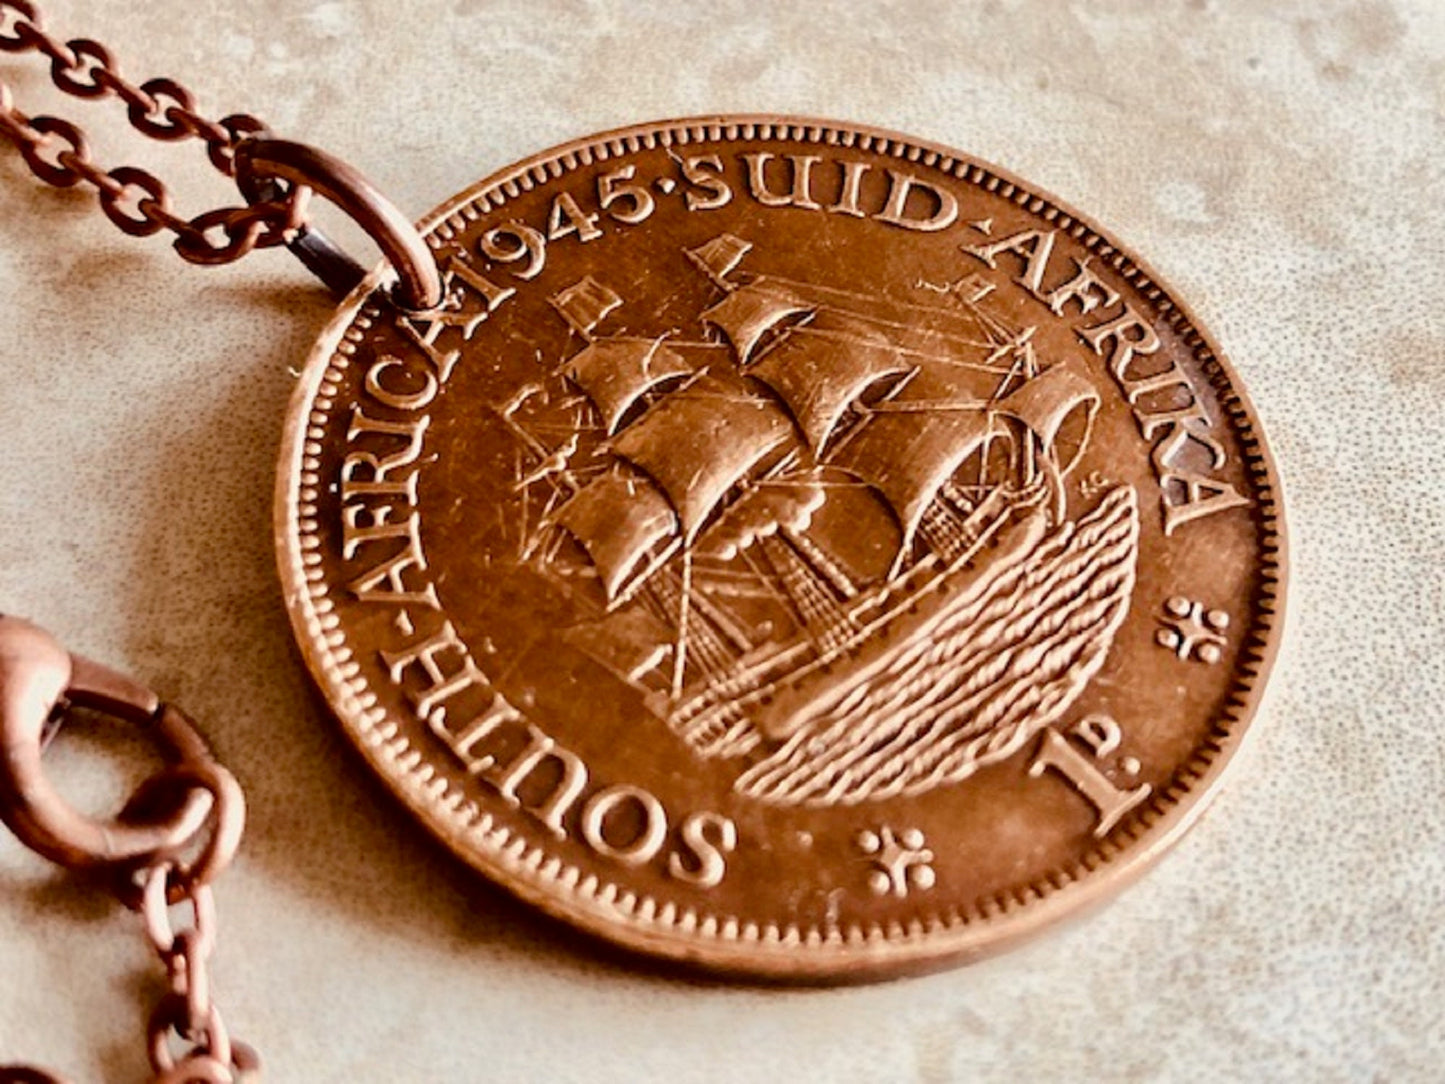 South Africa Coin Necklace Africka Pendant Personal Old Vintage Handmade Jewelry Gift Friend Charm For Him Her World Coin Collector